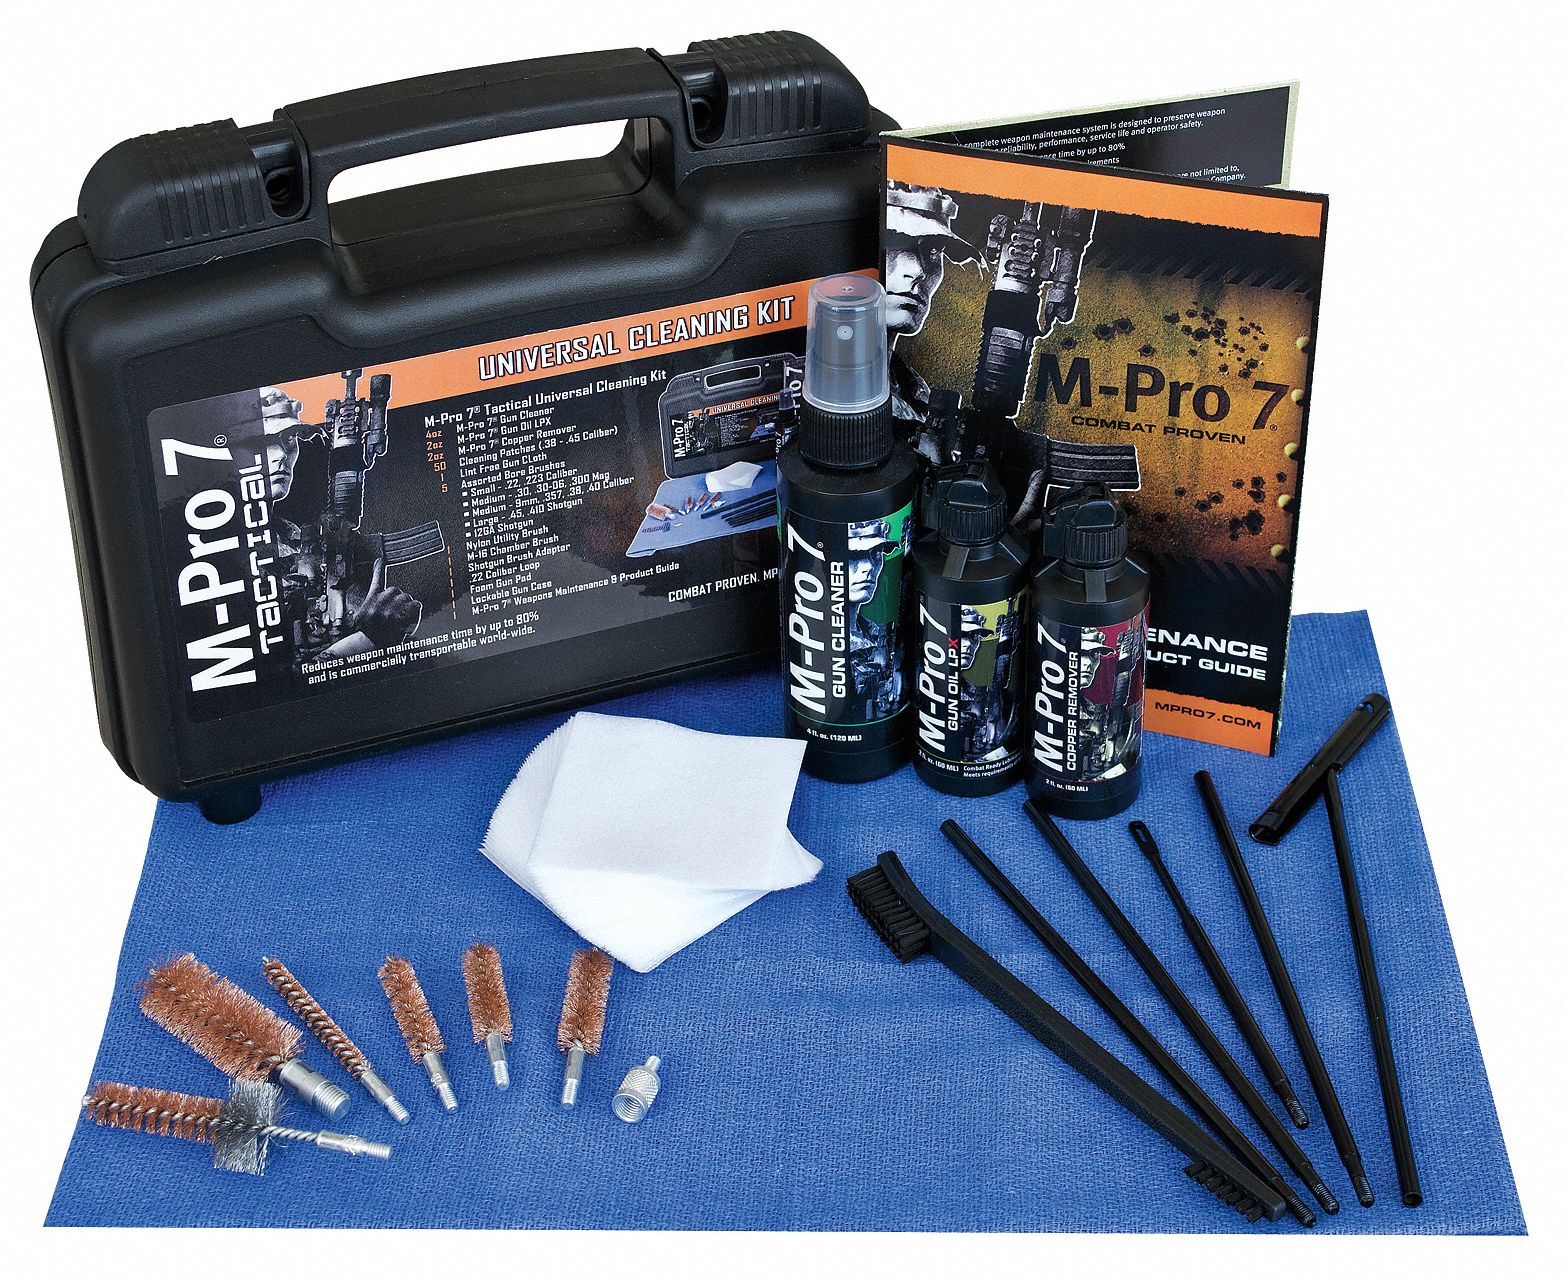 Cleaning Kit: All Weapons from .22cal to 12 ga Shotgun